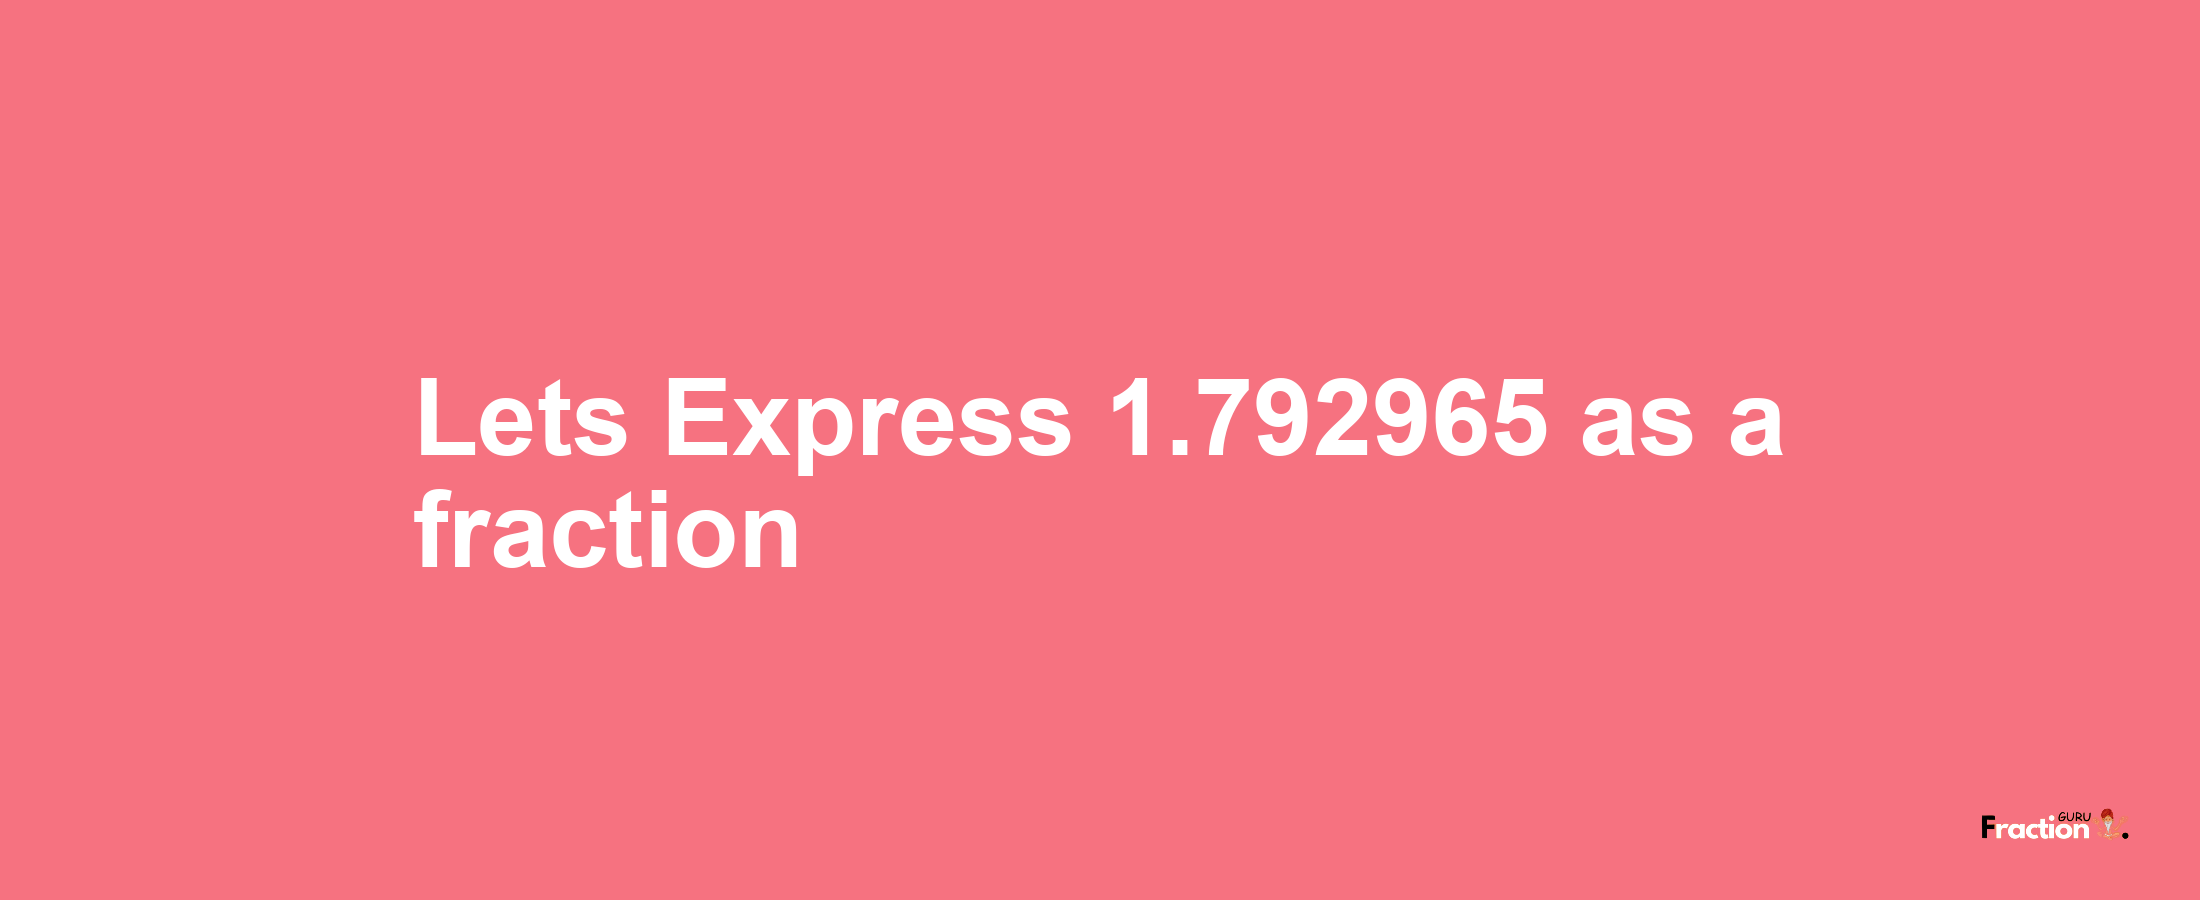 Lets Express 1.792965 as afraction